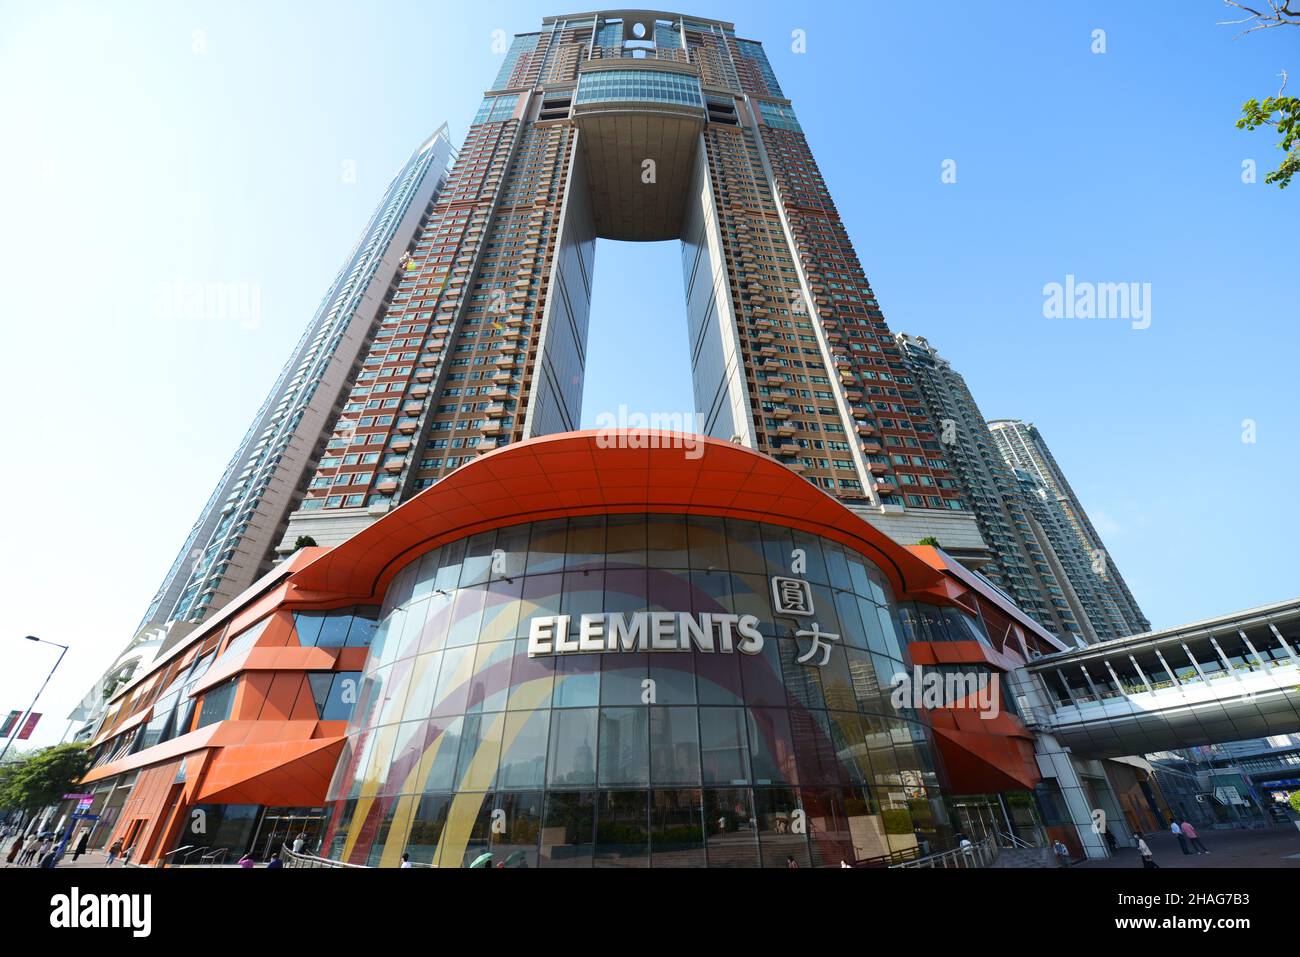 Elements shopping mall in West Kowloon, Hong Kong. Stock Photo